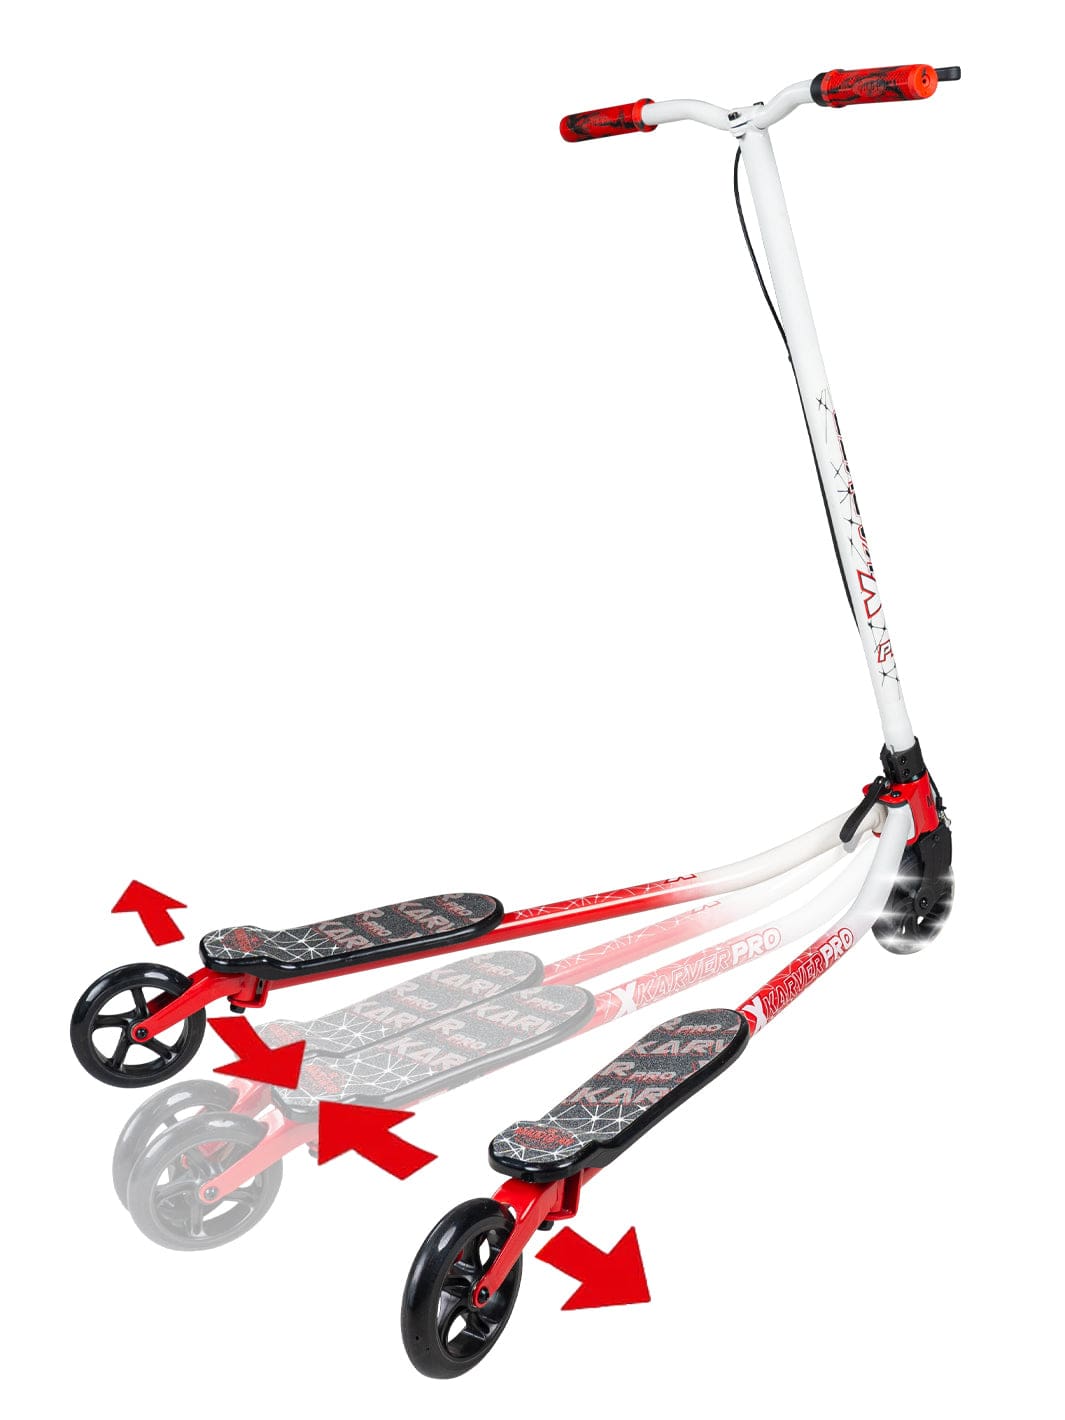 Madd Gear X-Karver Wiggle Drift Self-Propelled Scooter Boys Girls 5 Years Plus